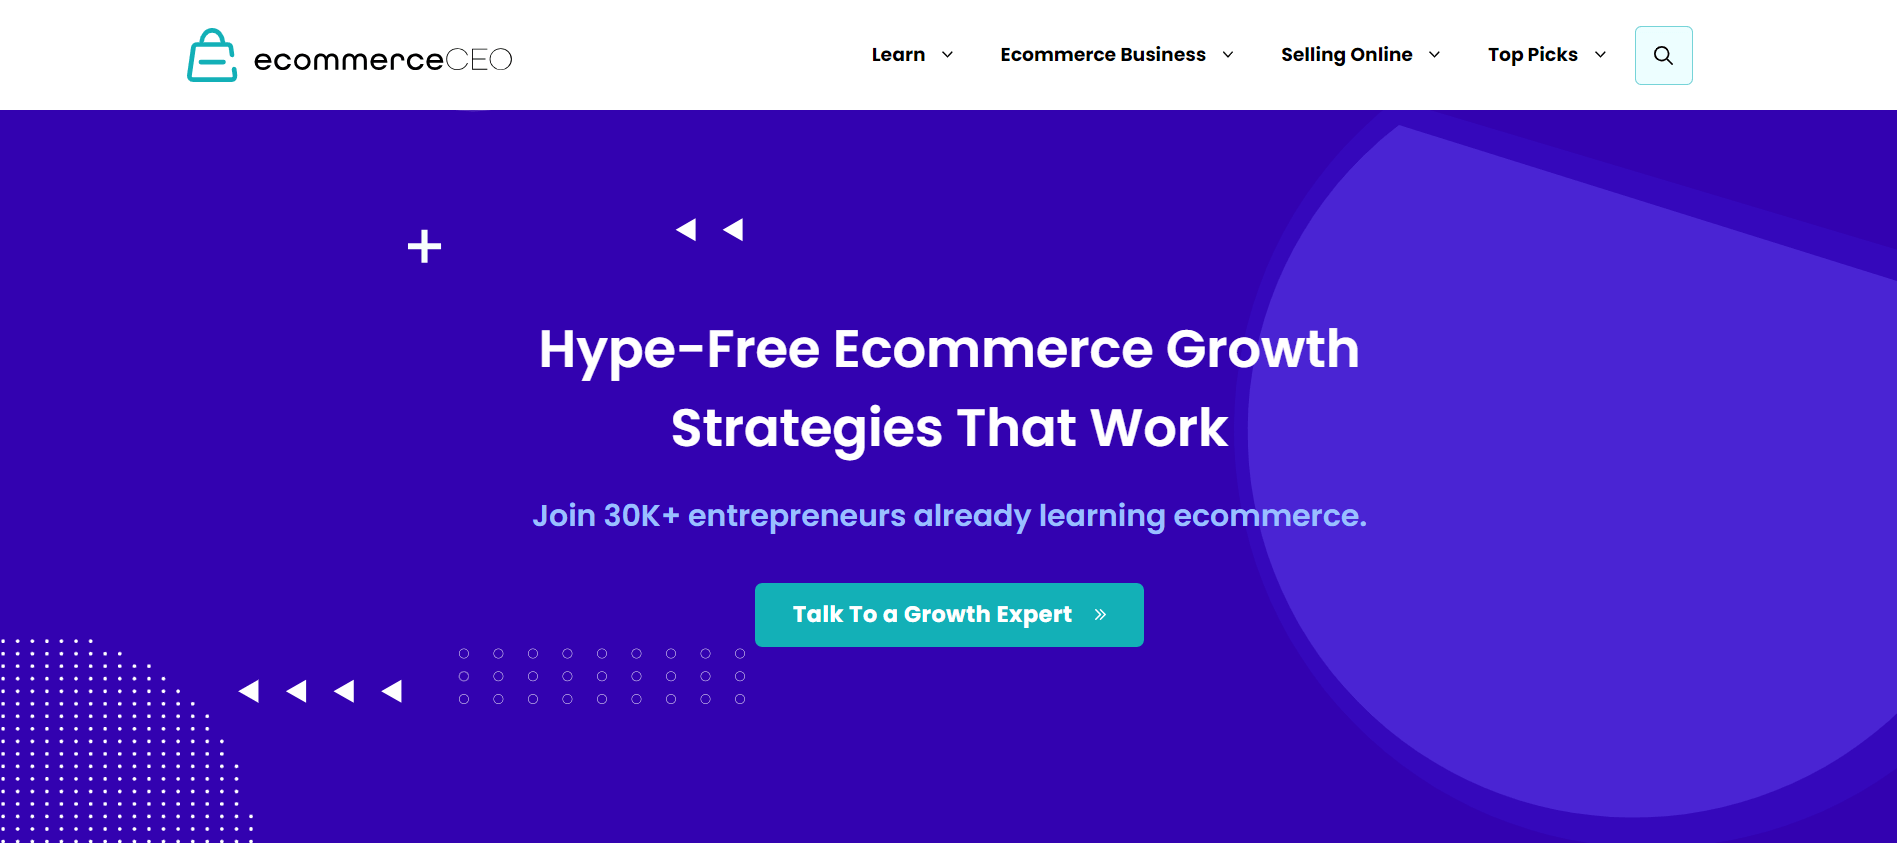 Top Shopify expert: Ecommerce CEO